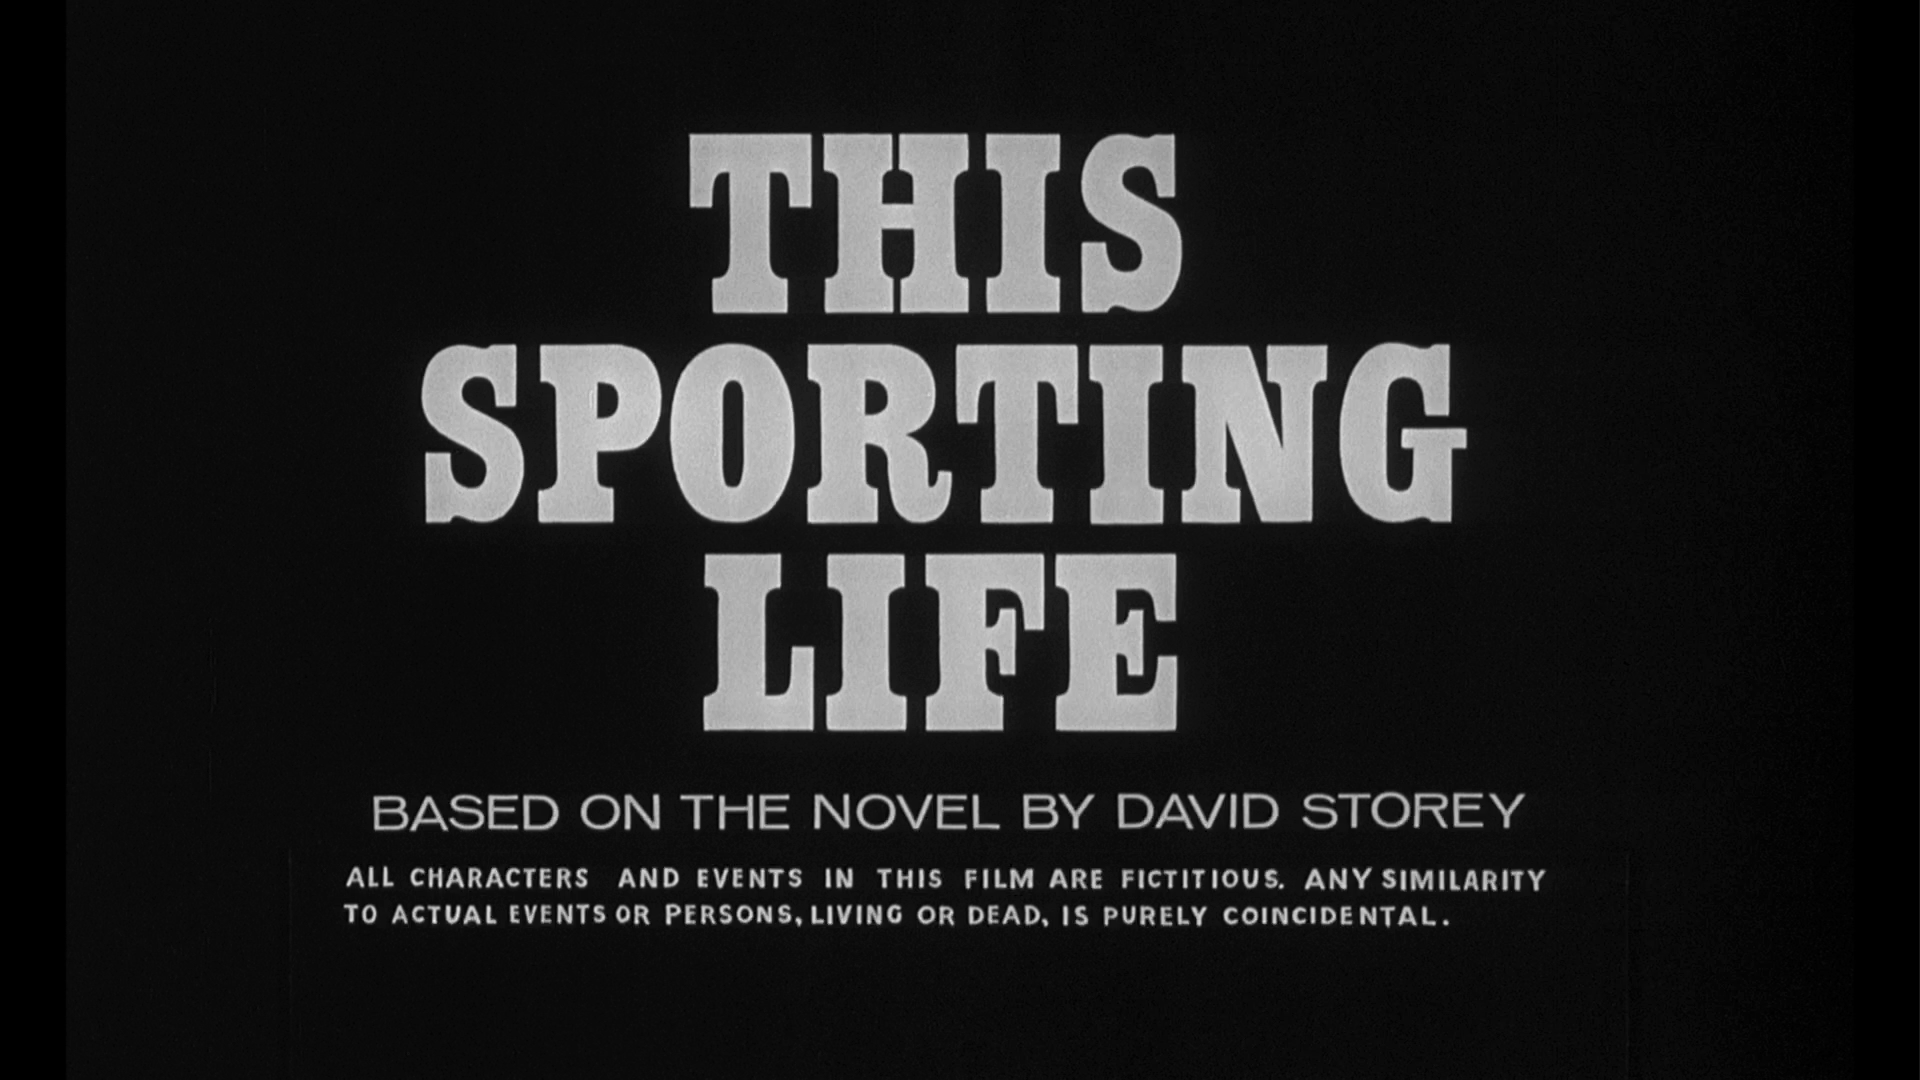 6 2 this is the life. The Sporting Life the Sporting Life. Sport is Life. Спортинг лайф по Музыке.